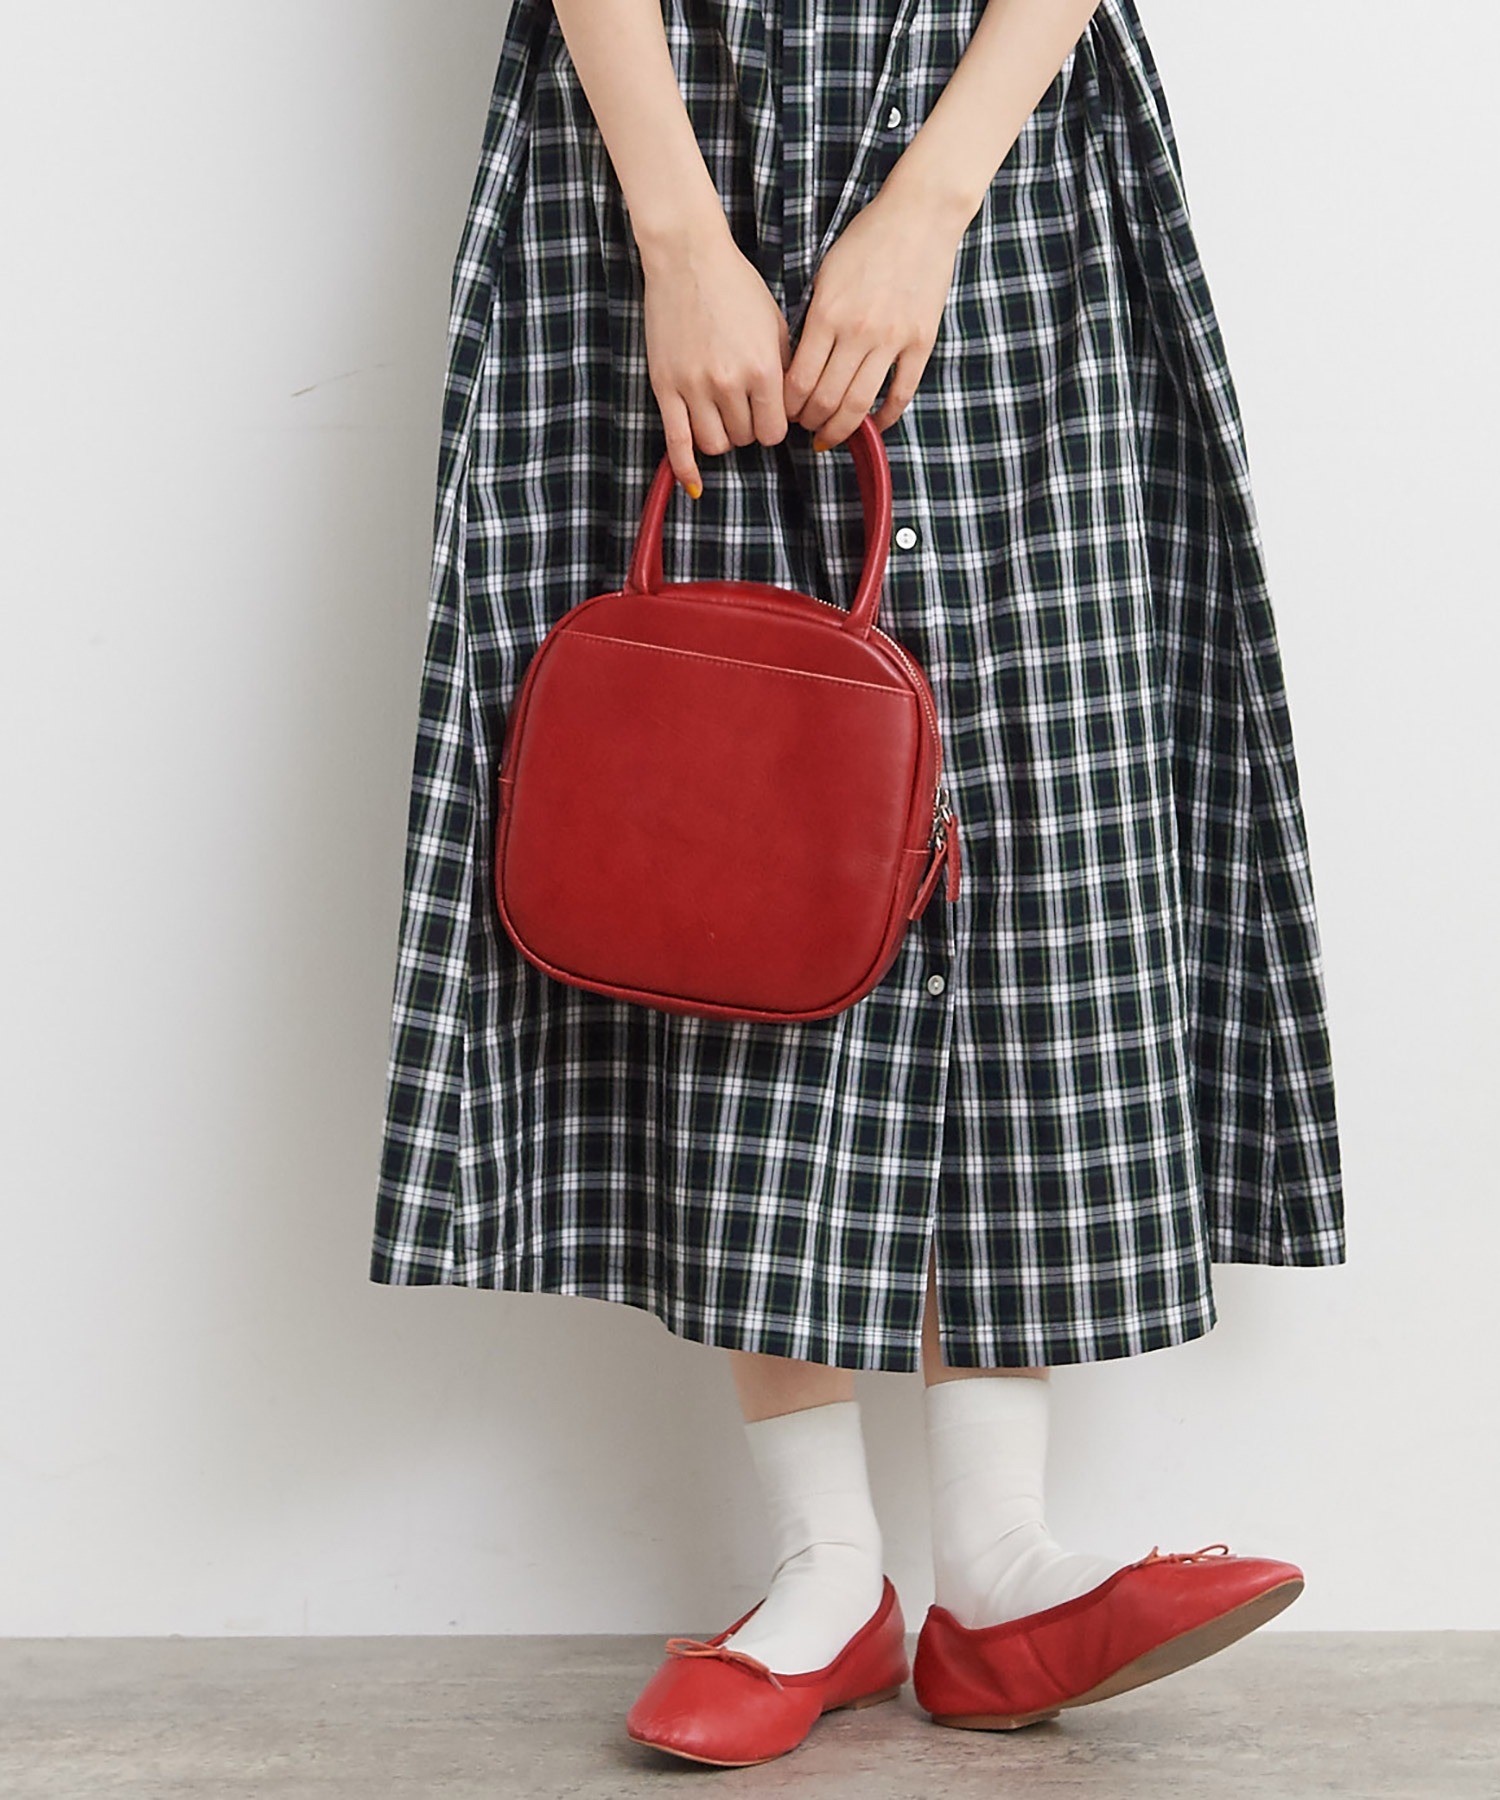 AMBIDEX Store ○△ICY LEATHER BOSTONBAG(F アカ): Dot and Stripes 